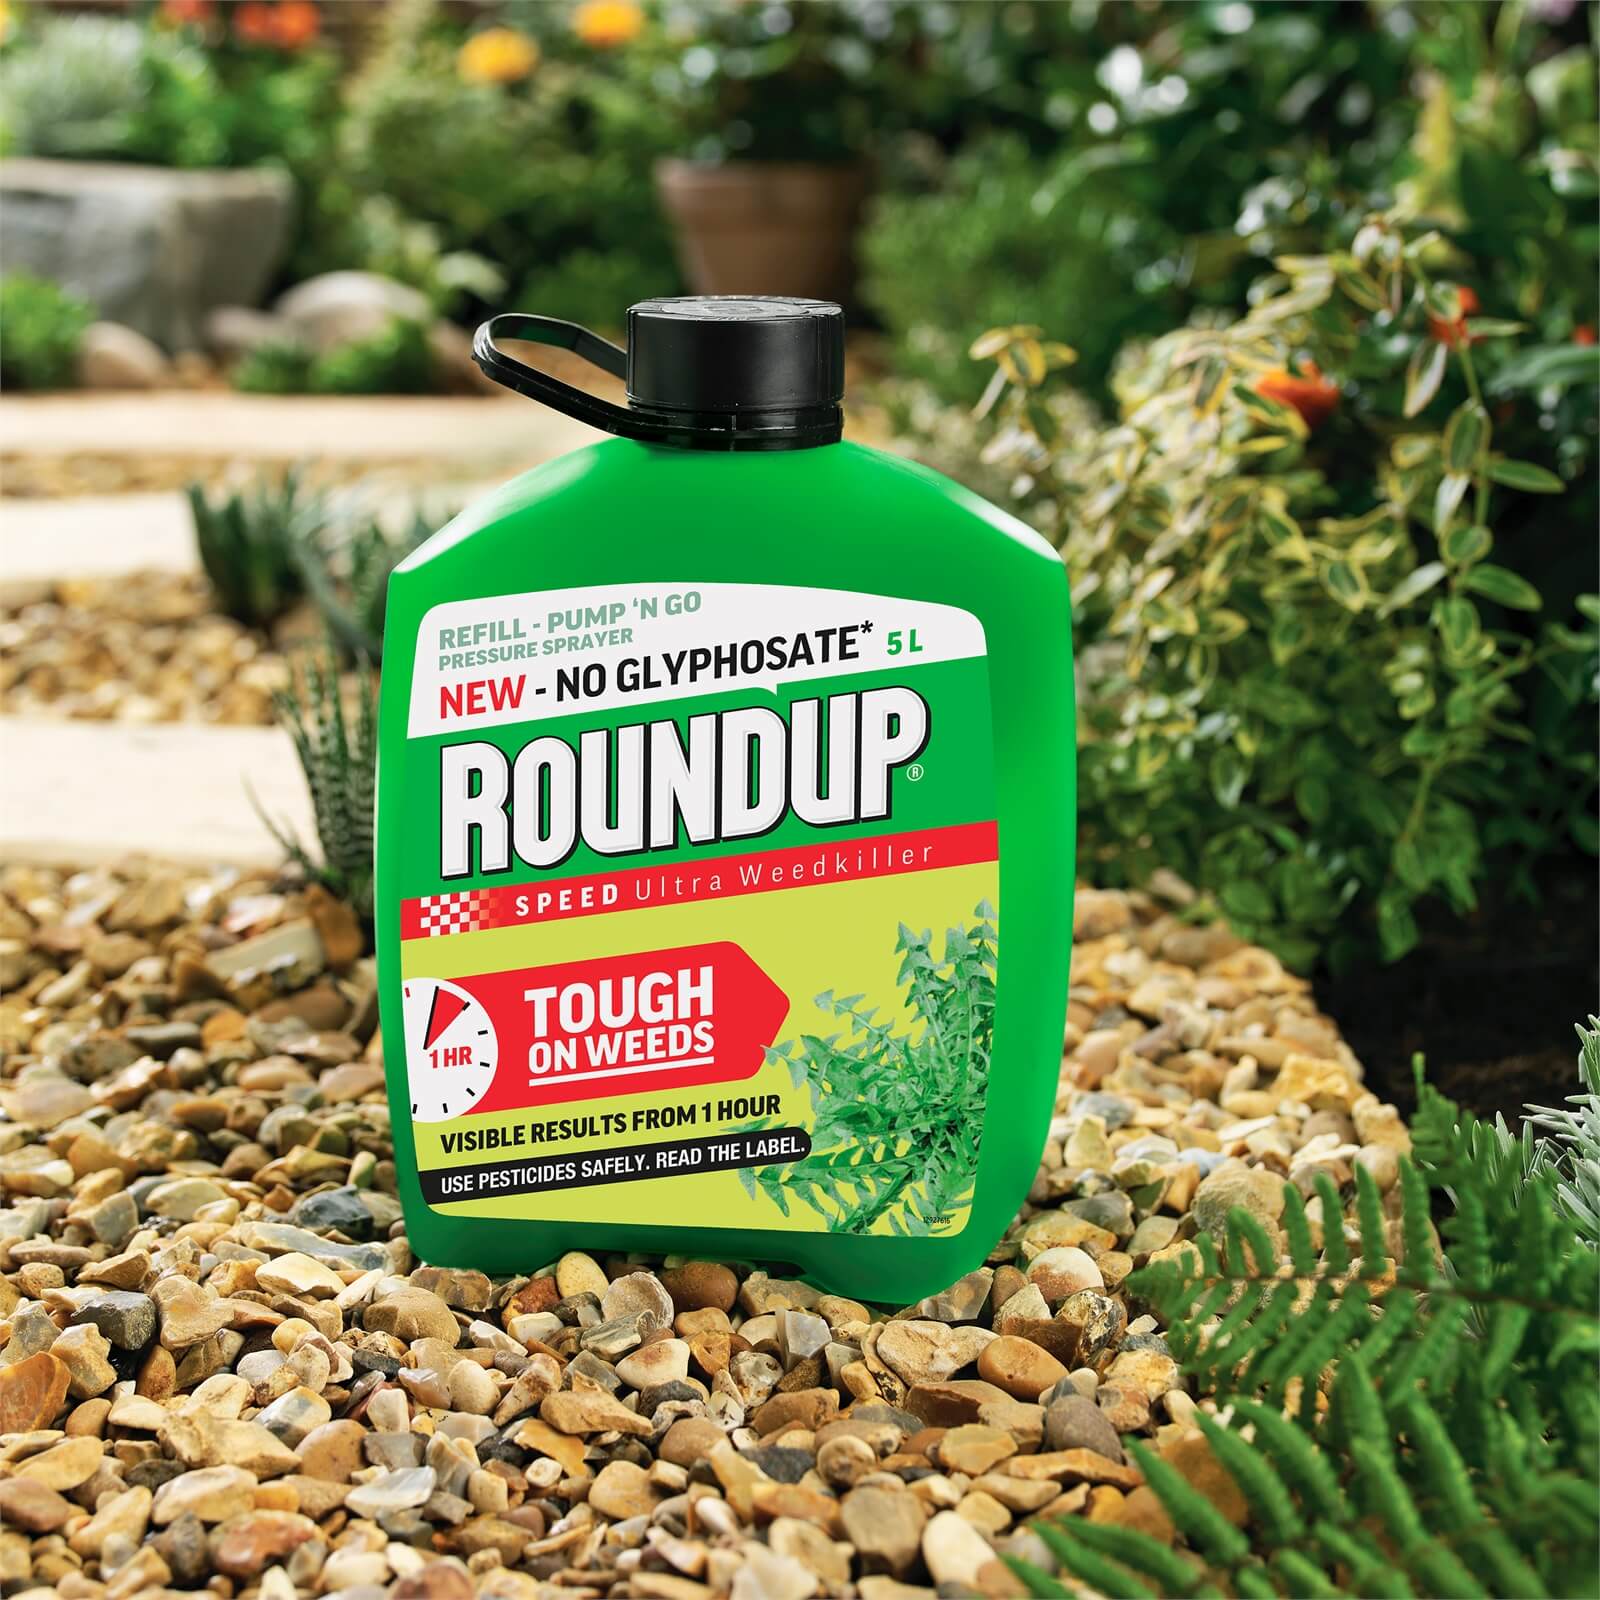 Roundup Speed Ultra Ready To Use Pump N Go Weedkiller Refill - 5L